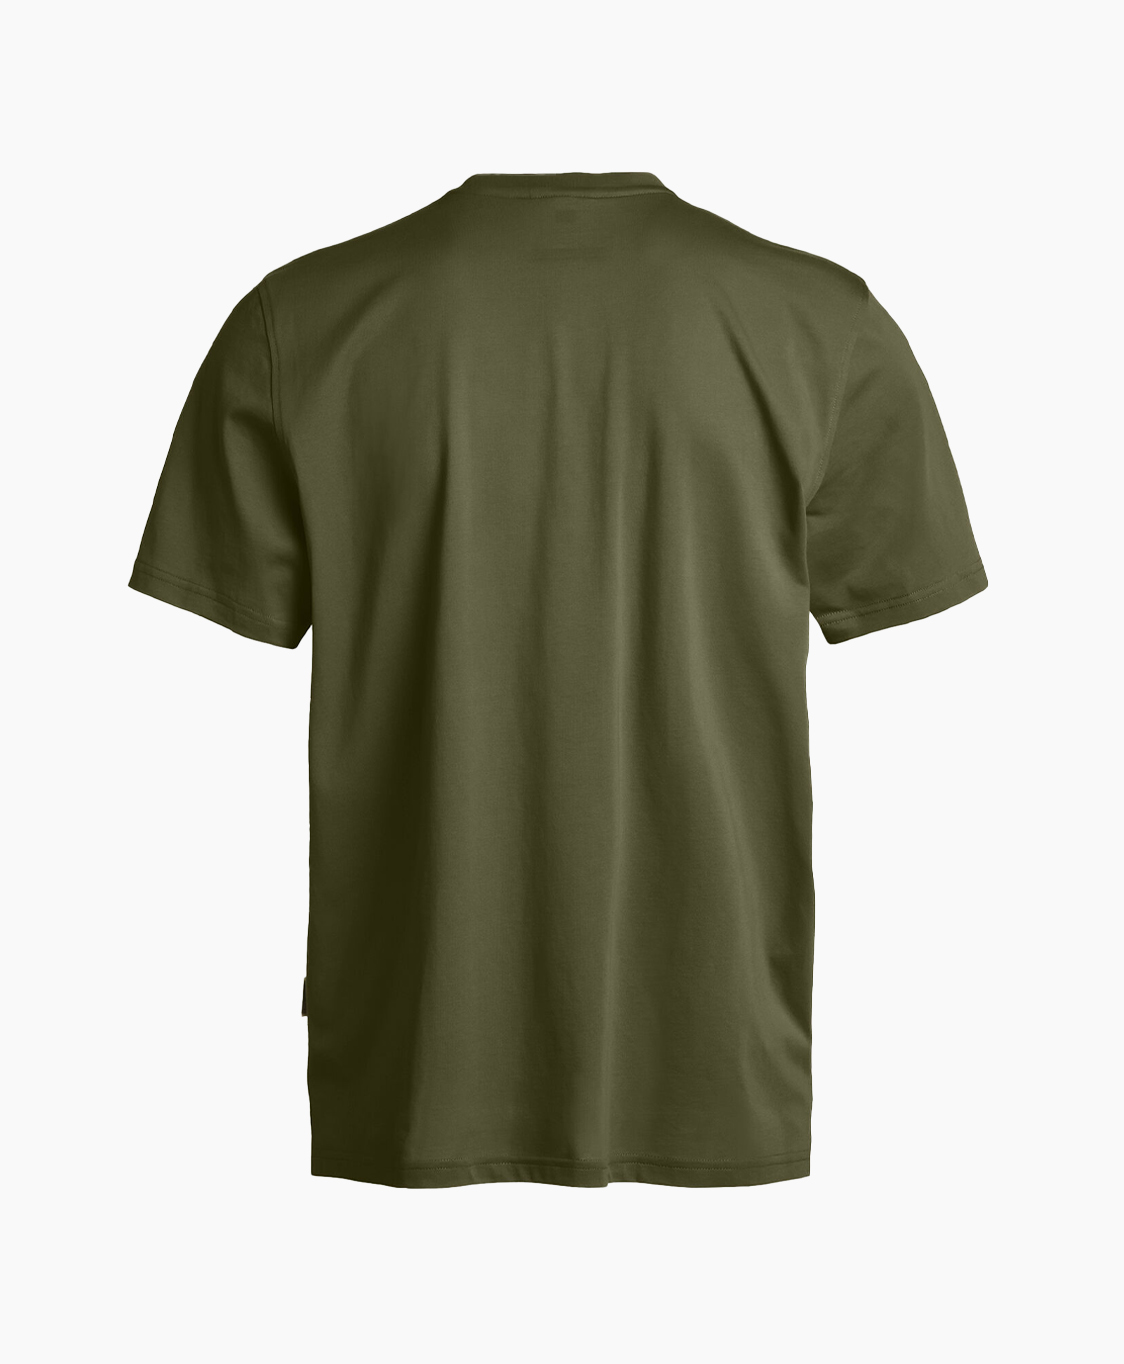 Parajumpers  T-shirt Korte Mouw Mojave Groen